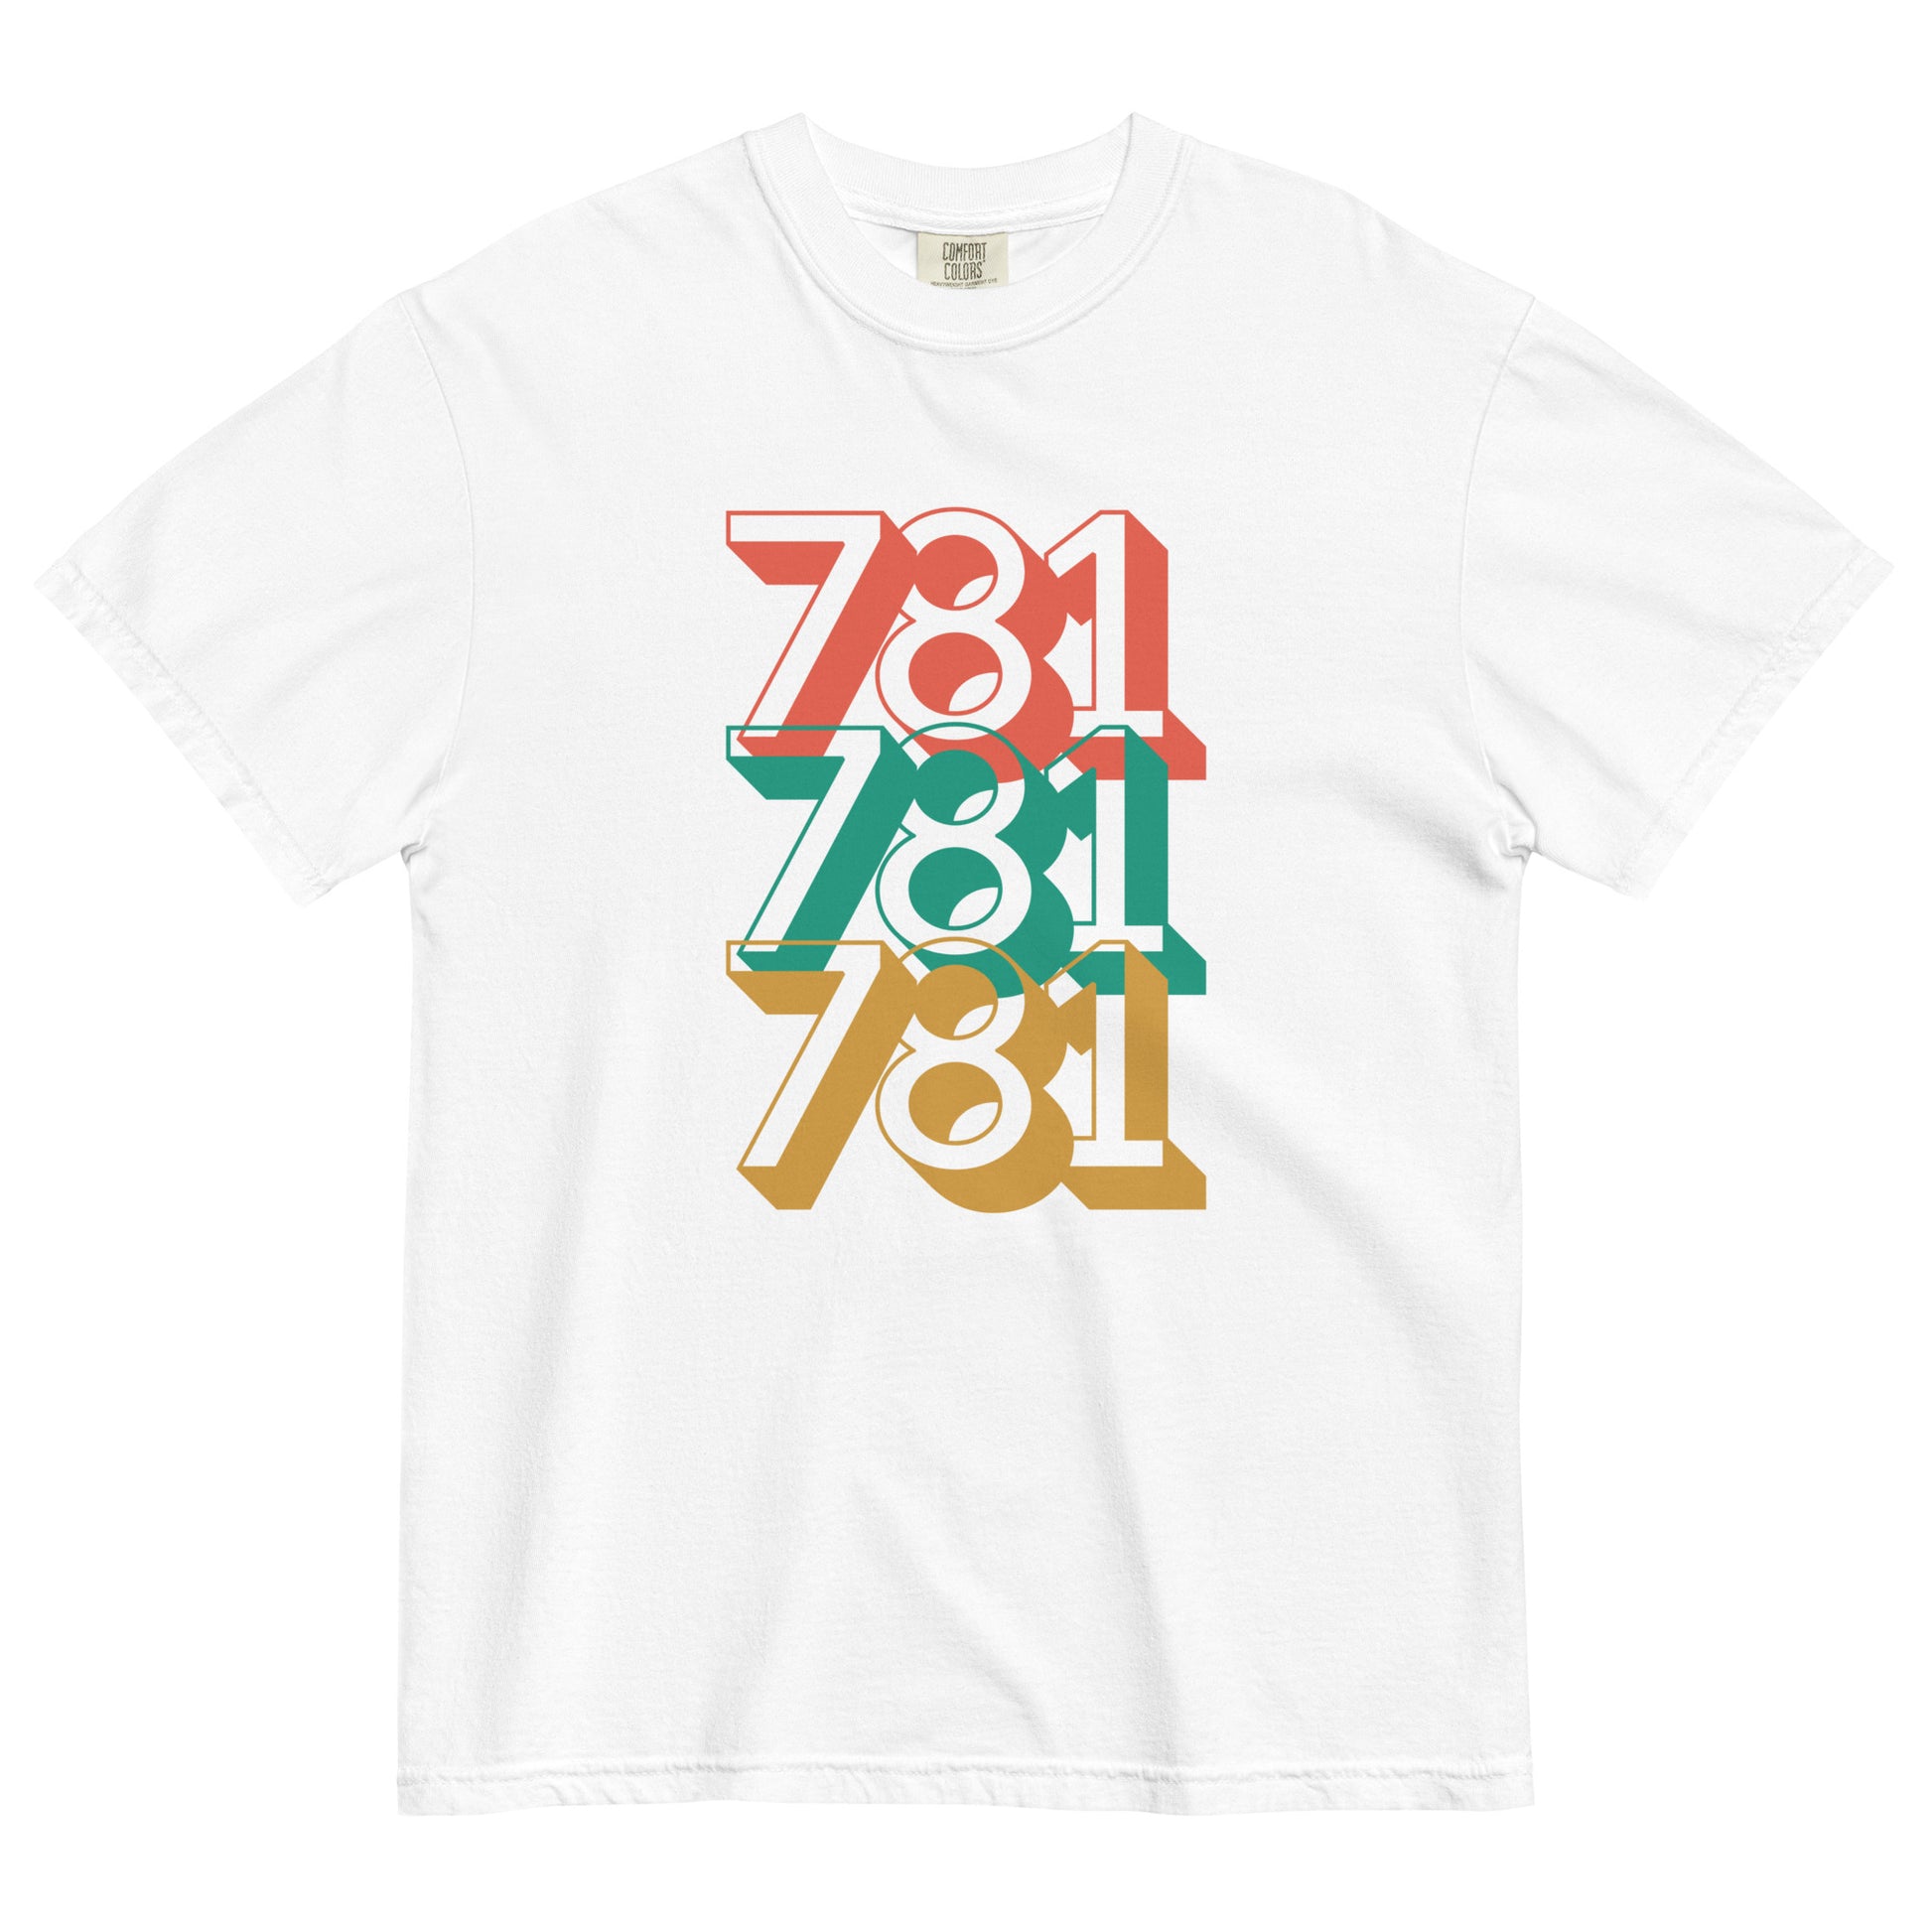 white tshirt with three 781s in red green and yellow